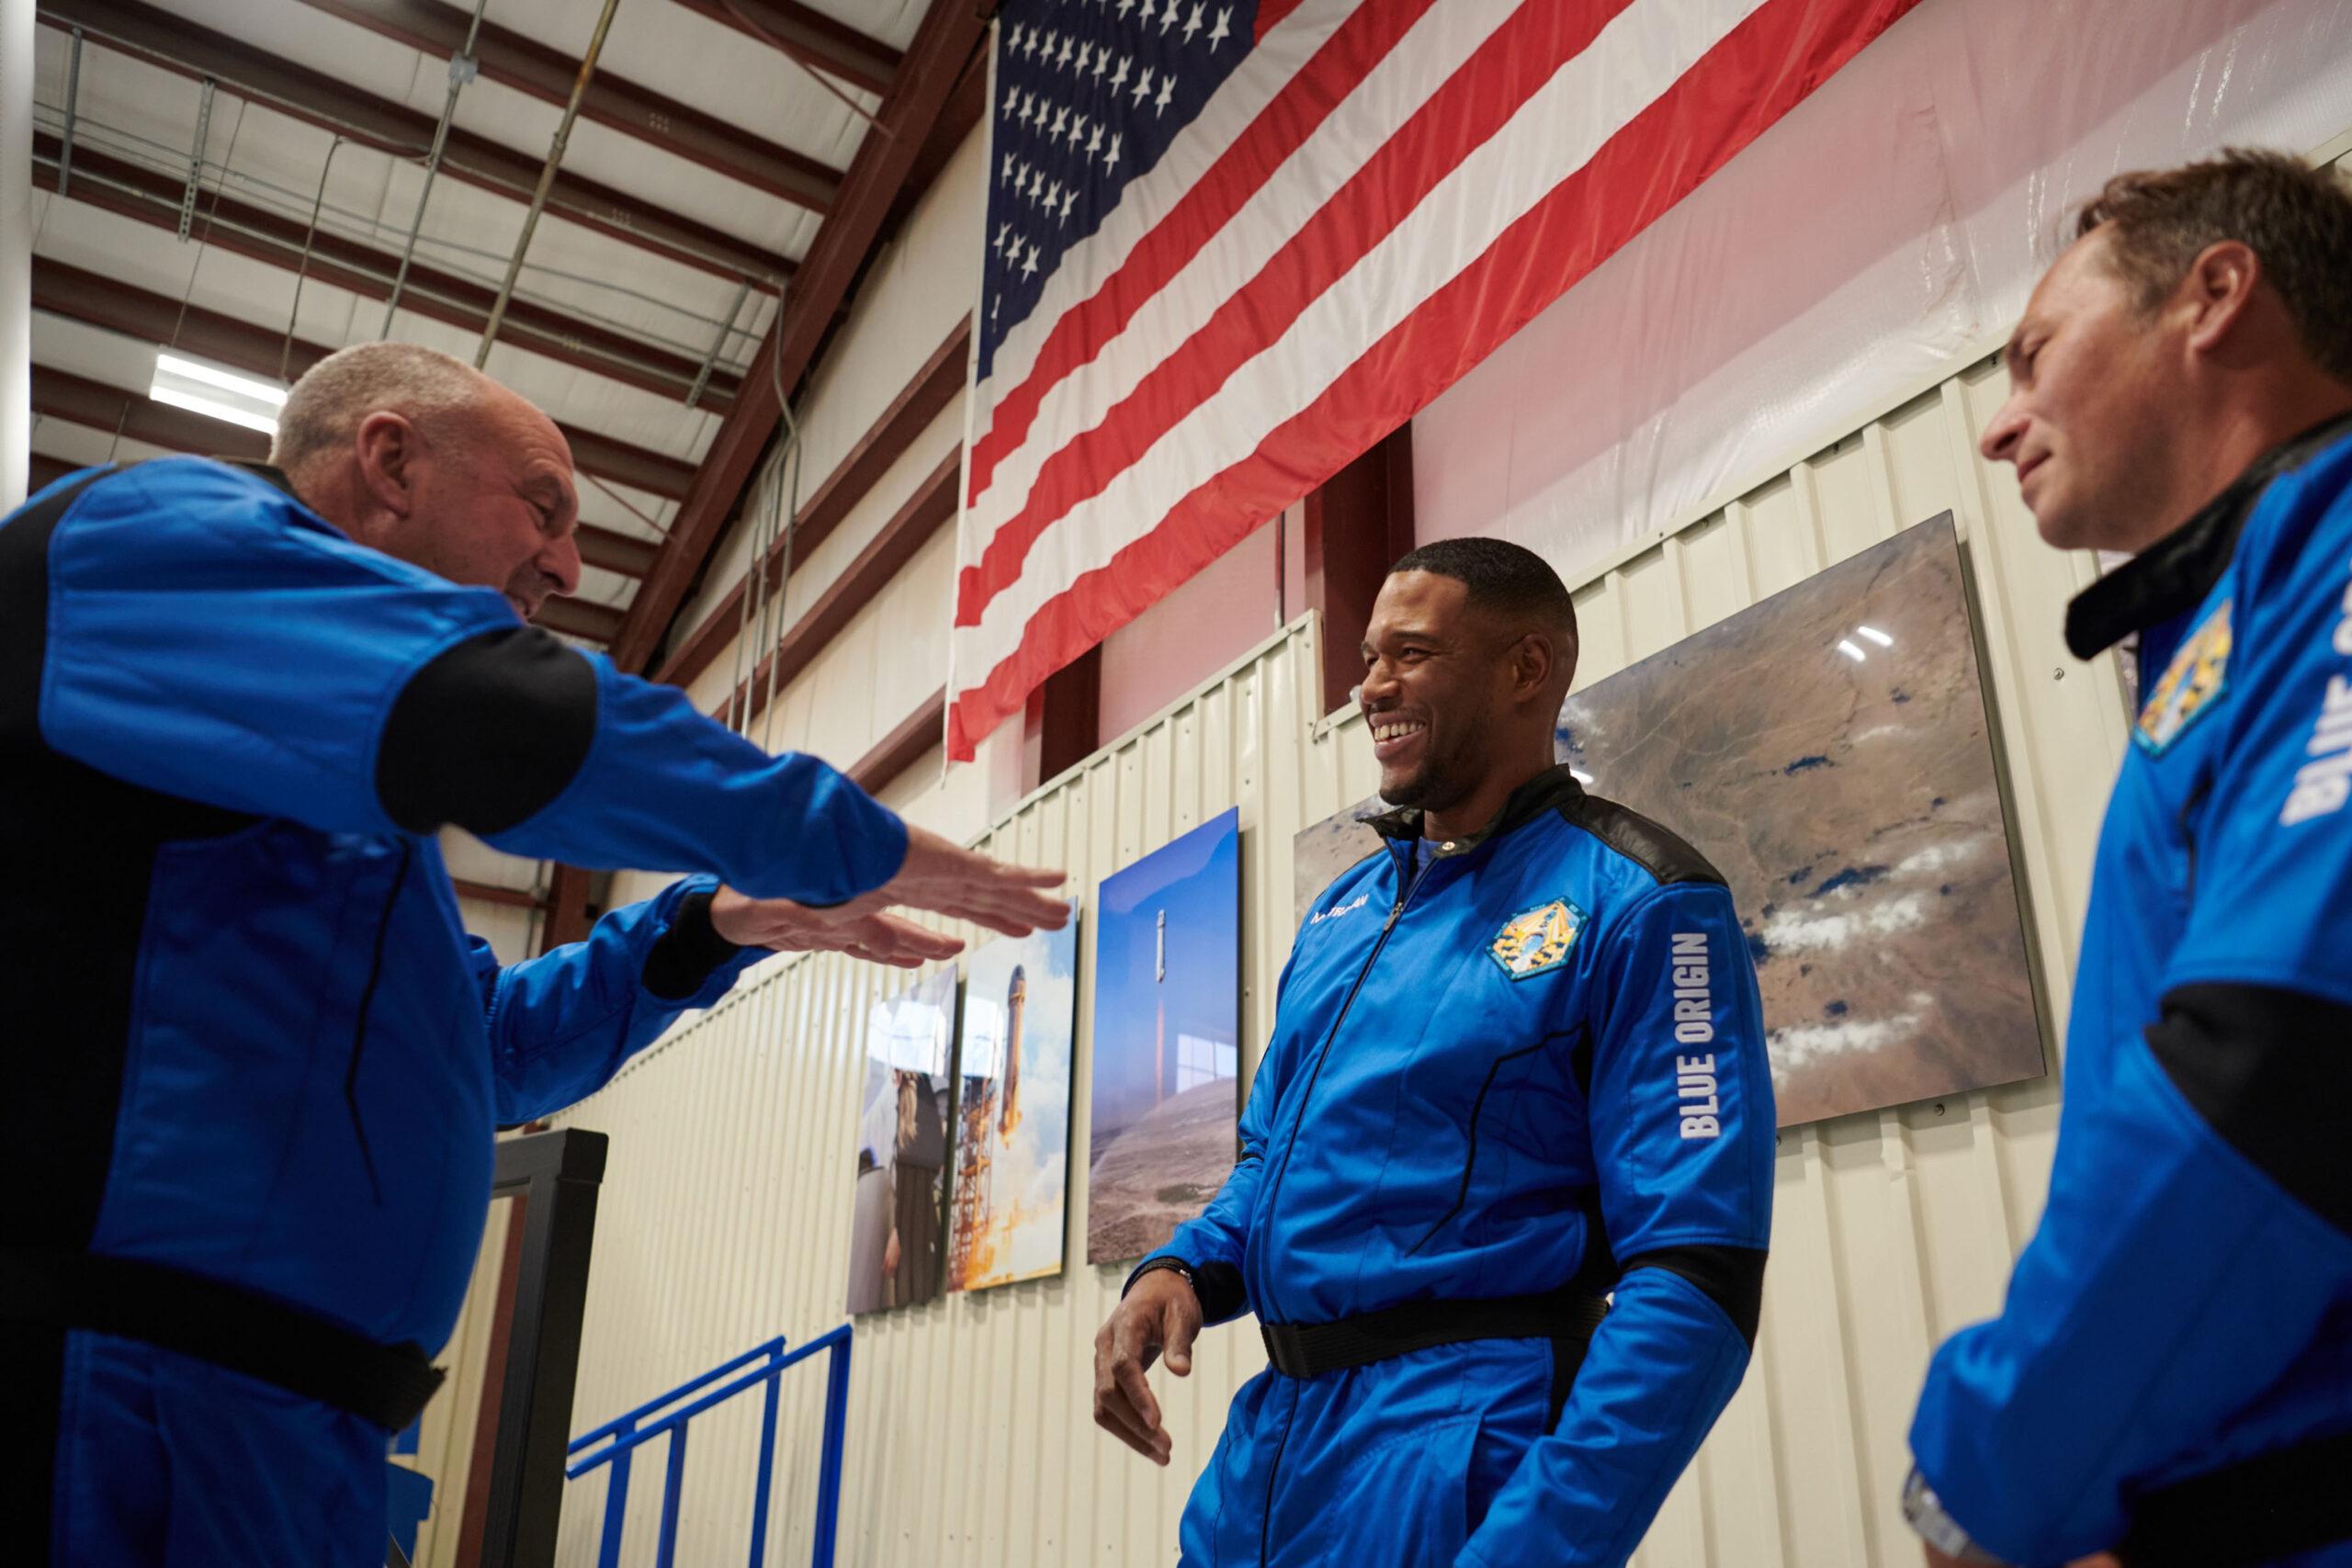 Michael Strahan is all smiles during astronaut training - but will have to wait two extra days before his flight to space with Jeff Bezos Blue Origin